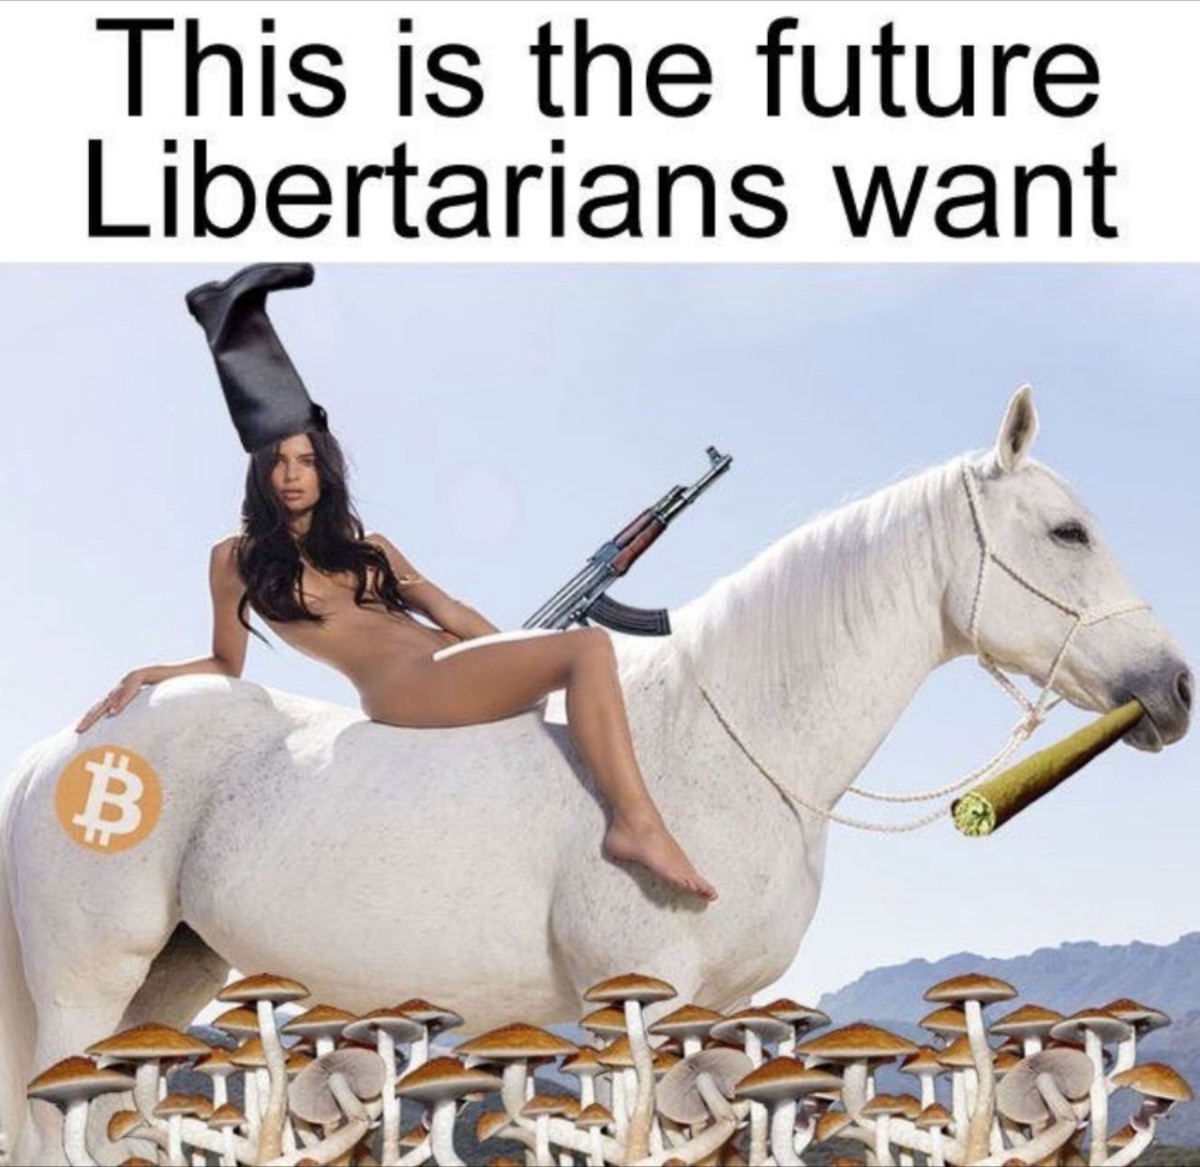 the future that libertarians want